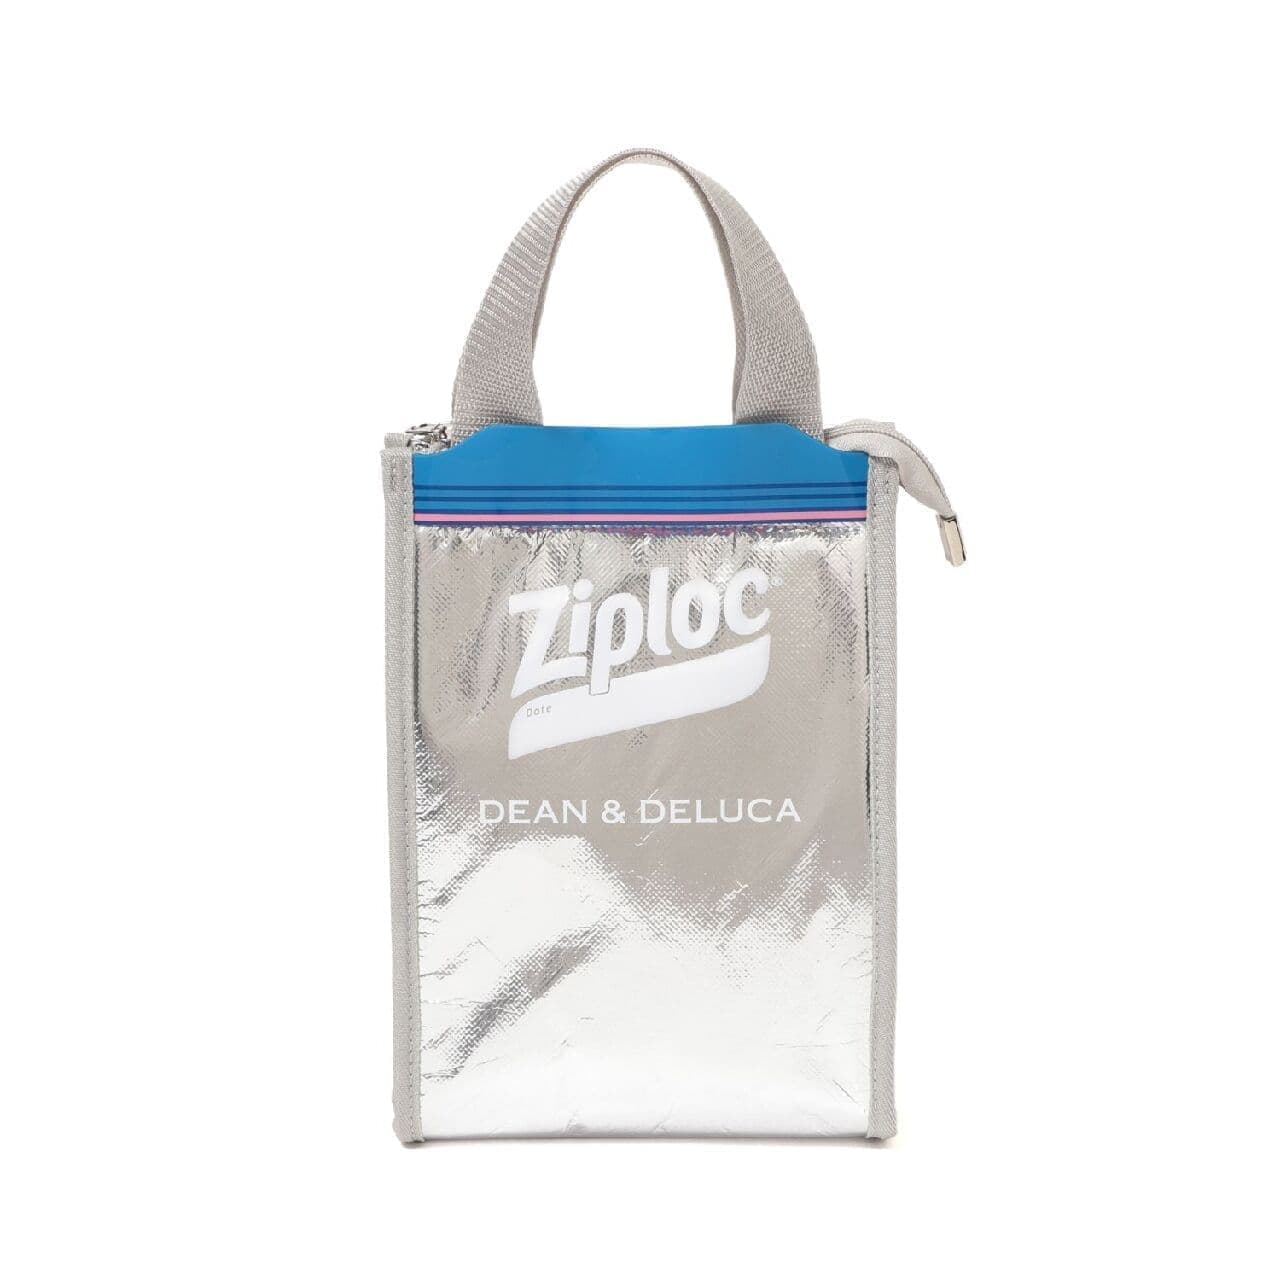 Newly improved Ziploc cooler bag sold out in one day --DEAN